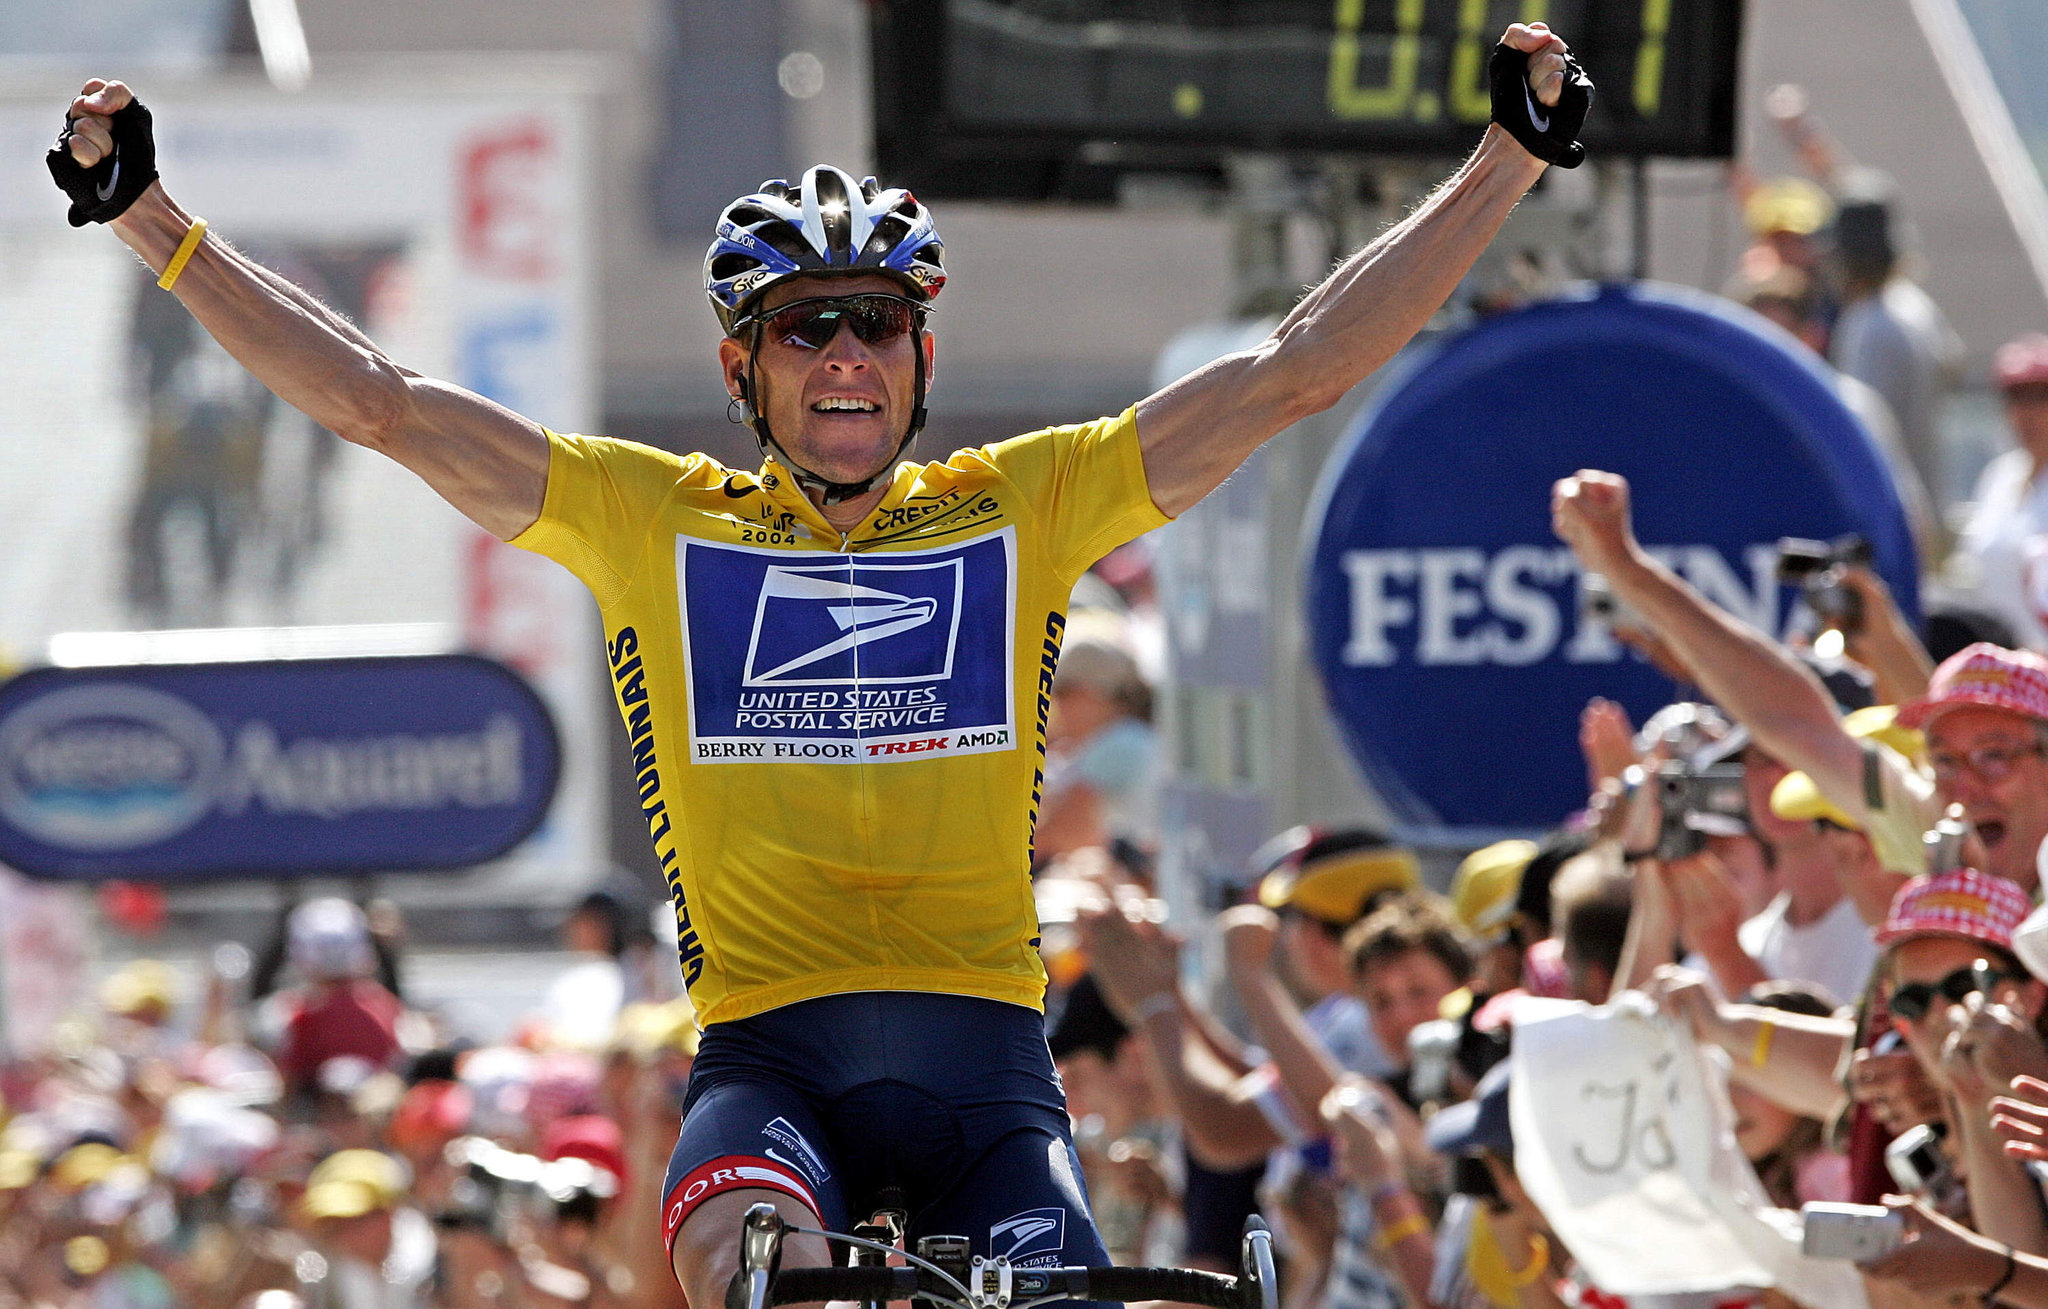 Lance Armstrong had an incredible fall from grace. From multiple Tour de France champion to steroid denier, and finally admitted everything but too late. Lost everything and he couldn't even get sympathy when he went through testicular cancer, that's how bad his spiral was. -jspockman